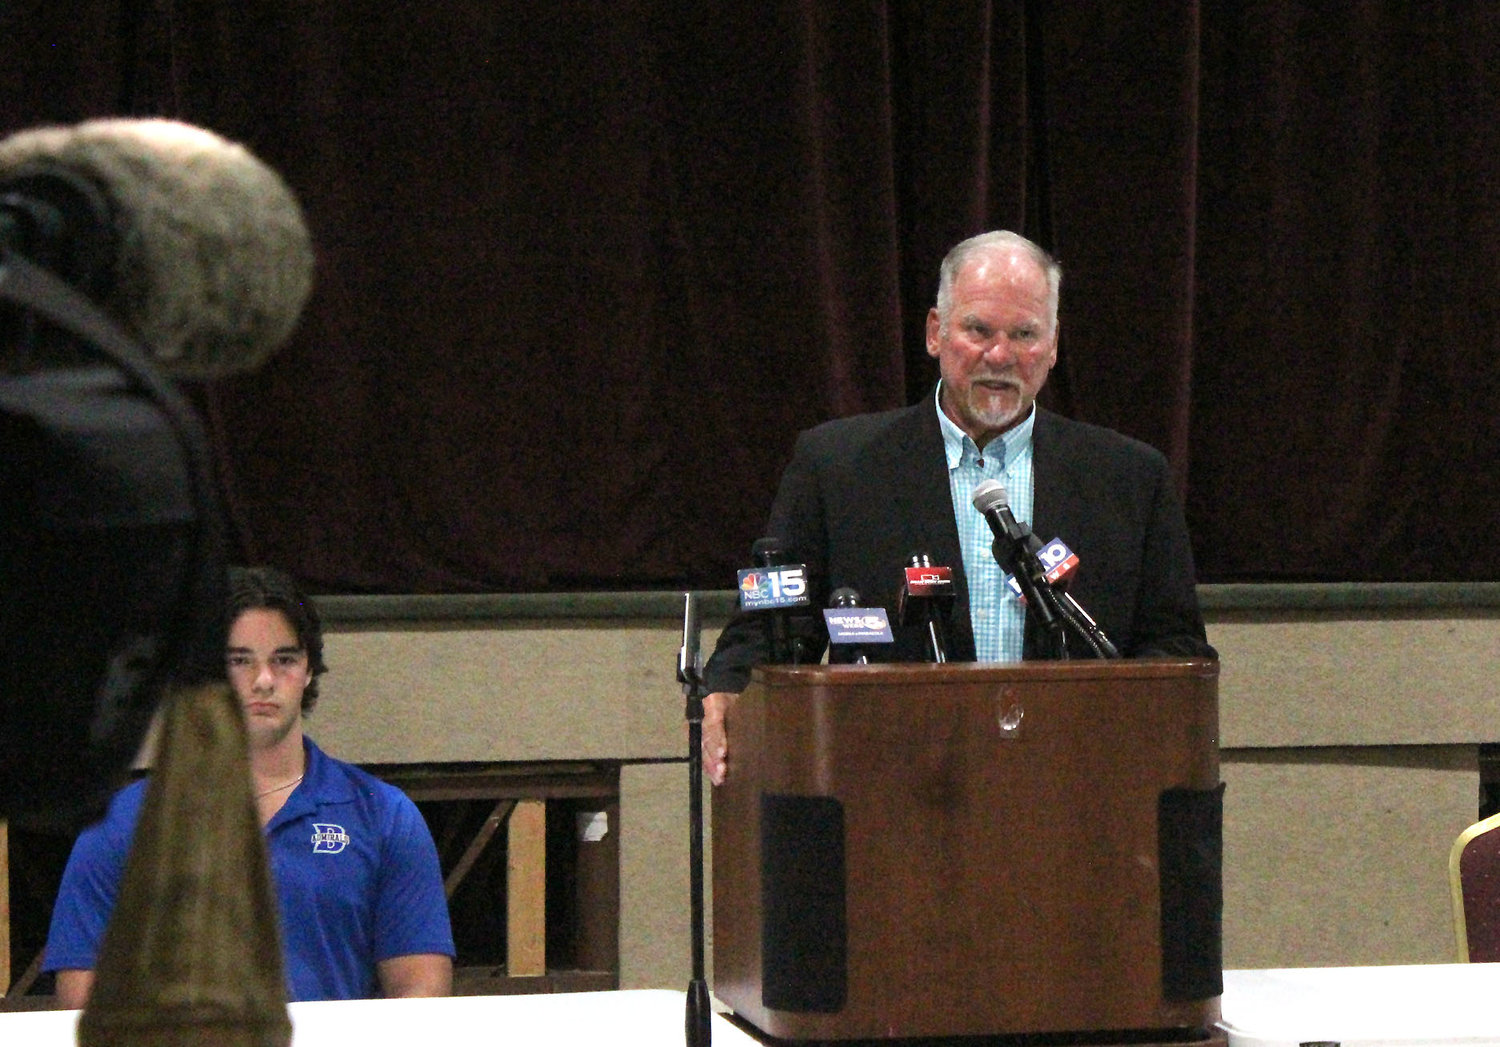 Entering his 16th year as head football coach of the Bayside Academy Admirals, Phil Lazenby, Cooper White and Jacob Stewart (not pictured) met with reporters in Daphne's Trojan Hall July 13 for the Baldwin County Media Day event to preview the season.